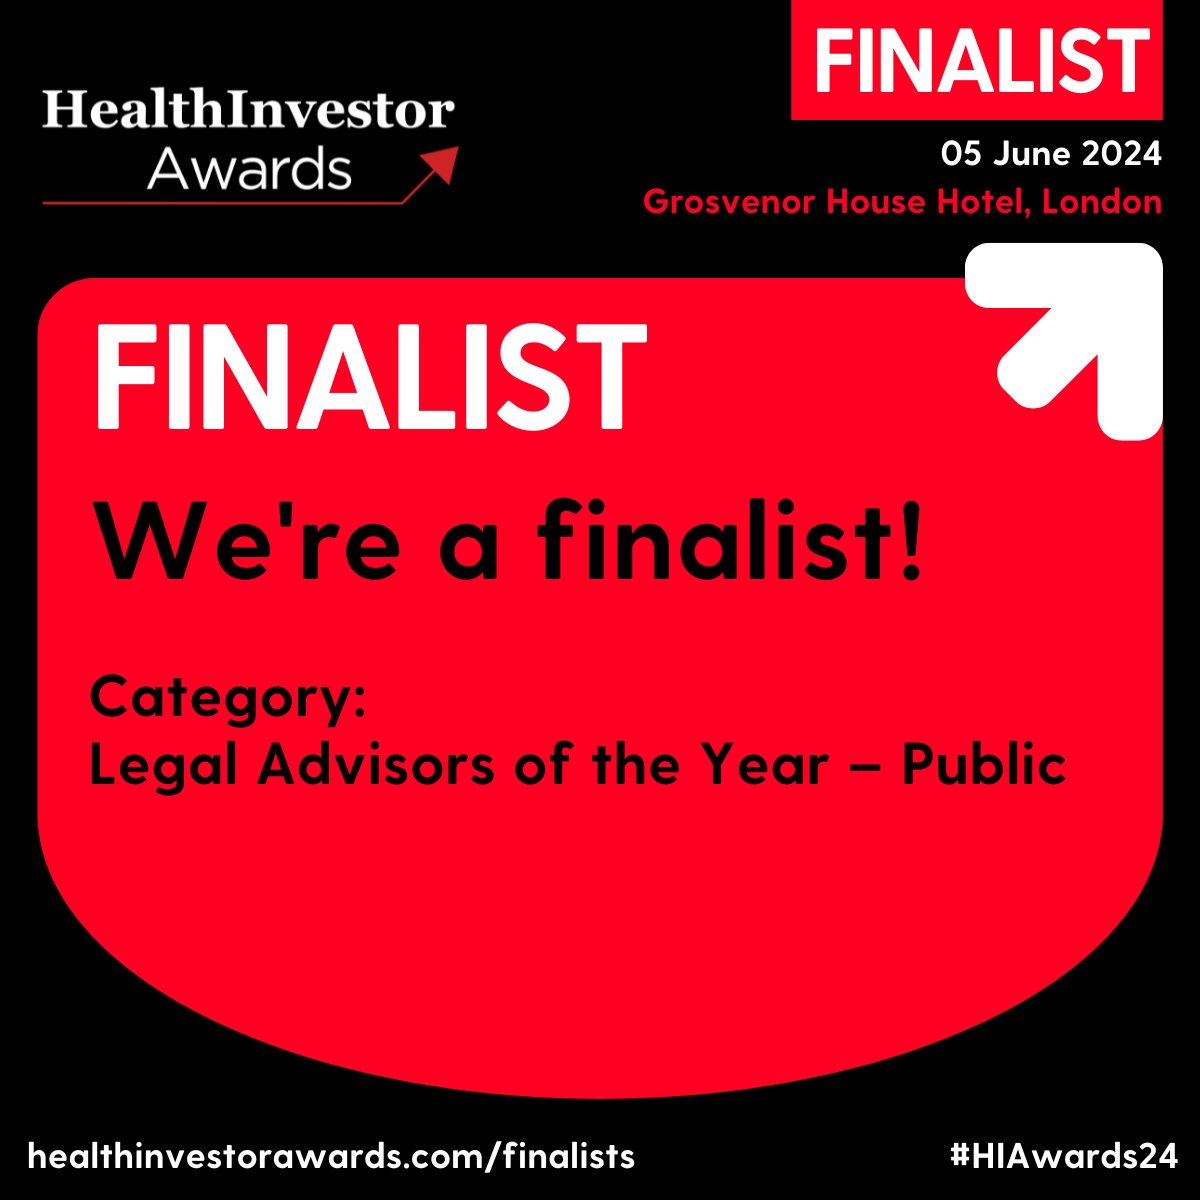 We're delighted to be shortlisted at the #HIAwards24, in the Legal Advisor of the Year – Public category. Our #healthcare practice manages clinical and non-clinical claims and #medicallaw related issues, representing the #NHS in both primary and secondary care.